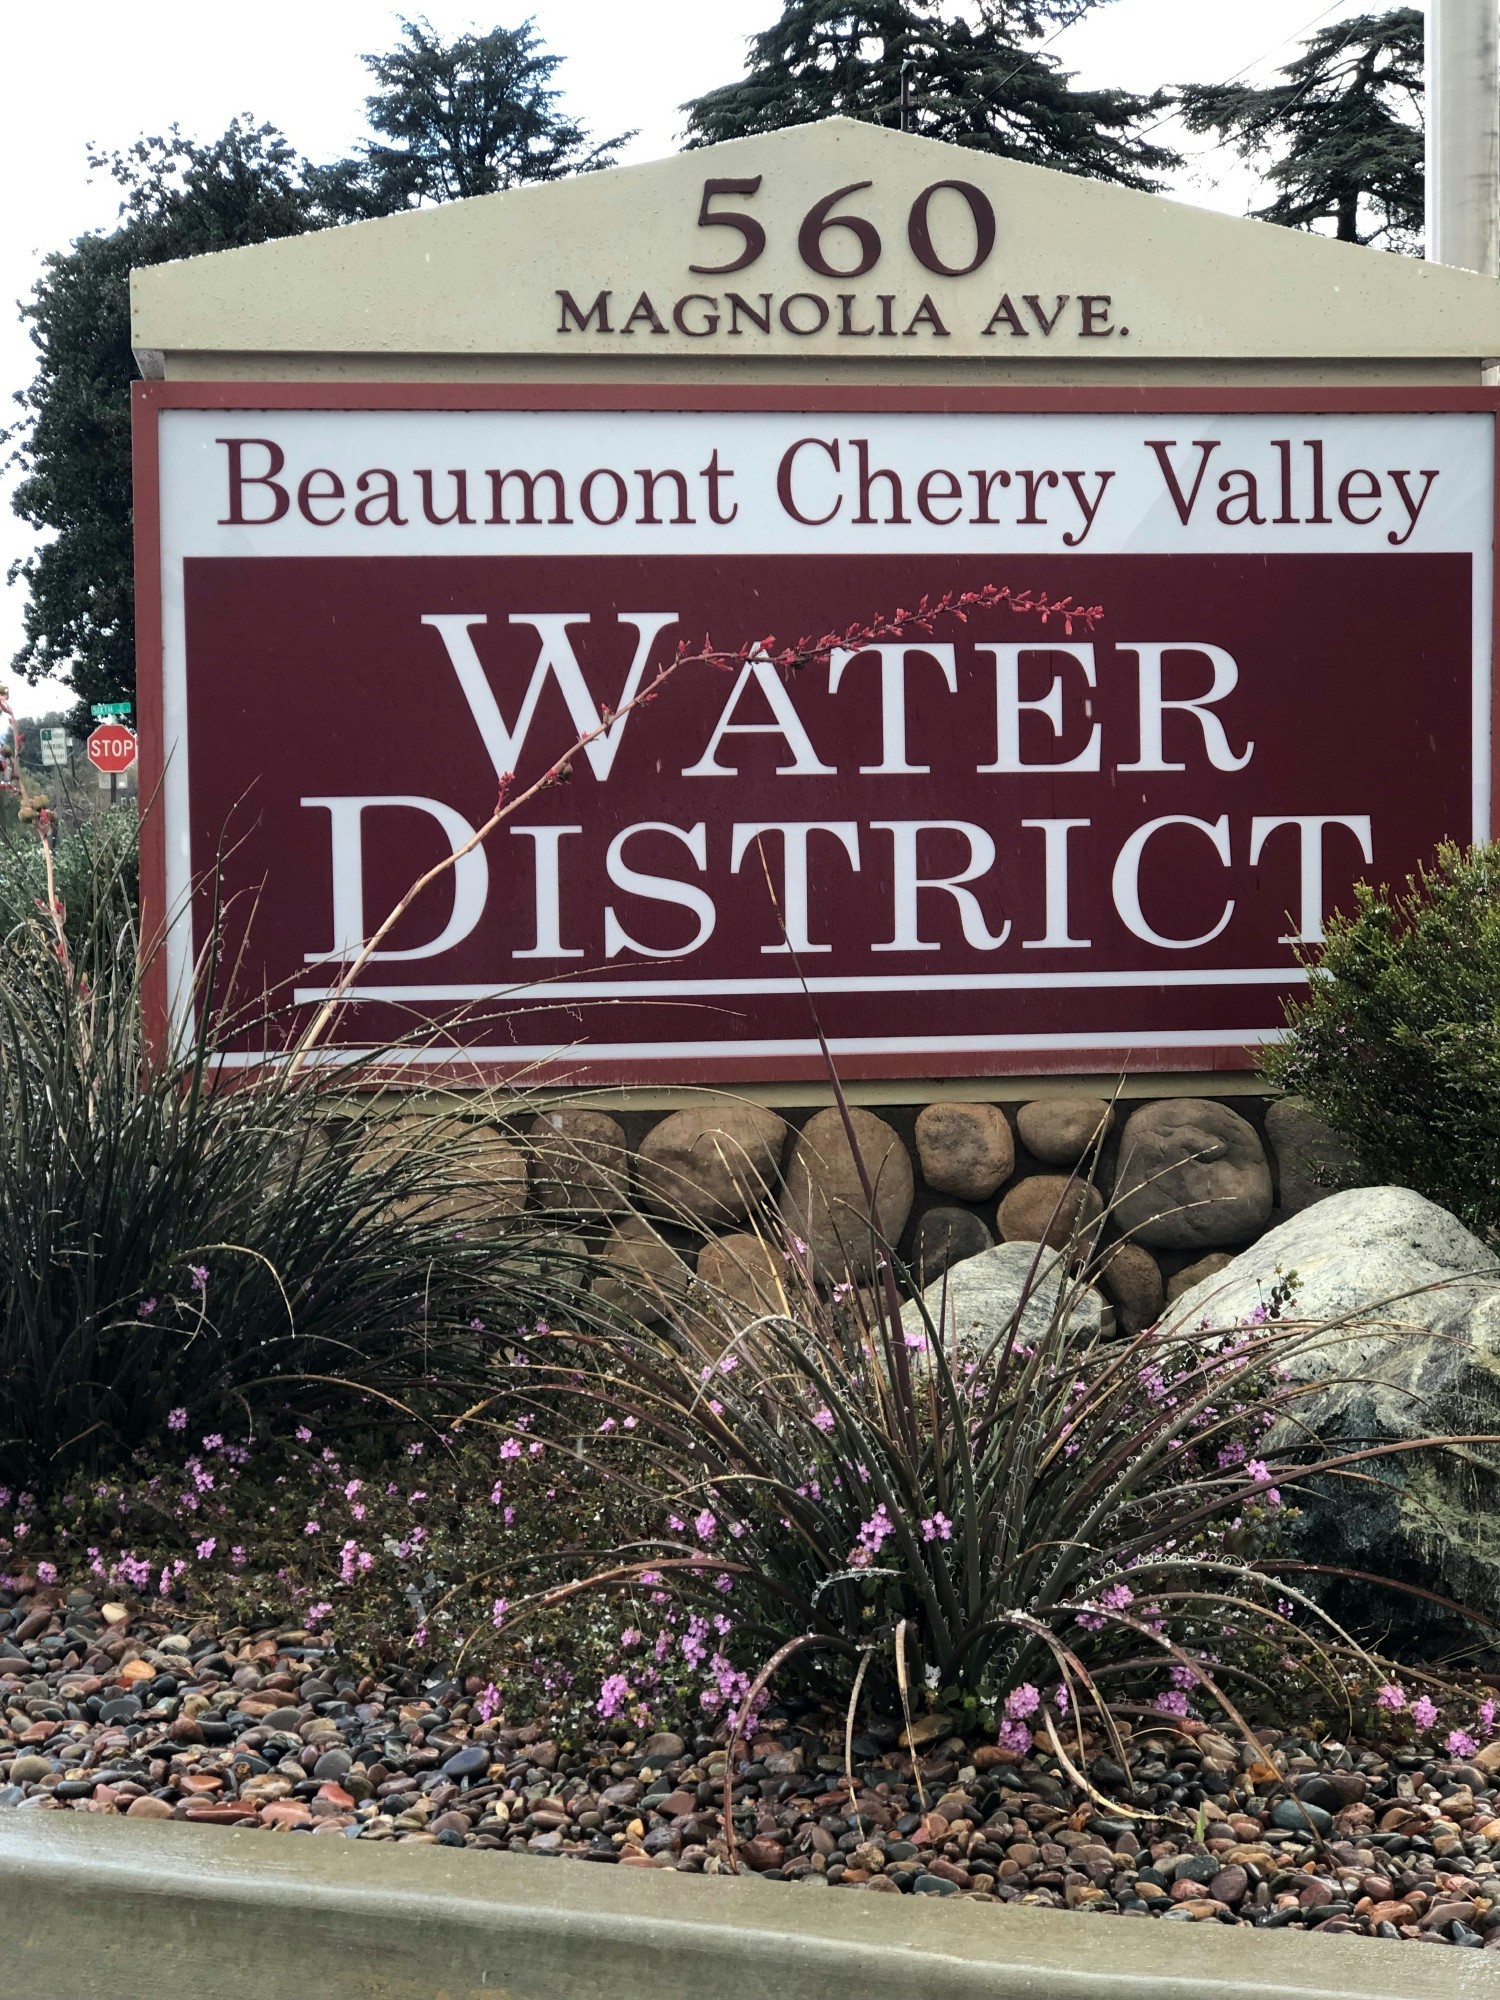 working-at-beaumont-cherry-valley-water-district-great-place-to-work